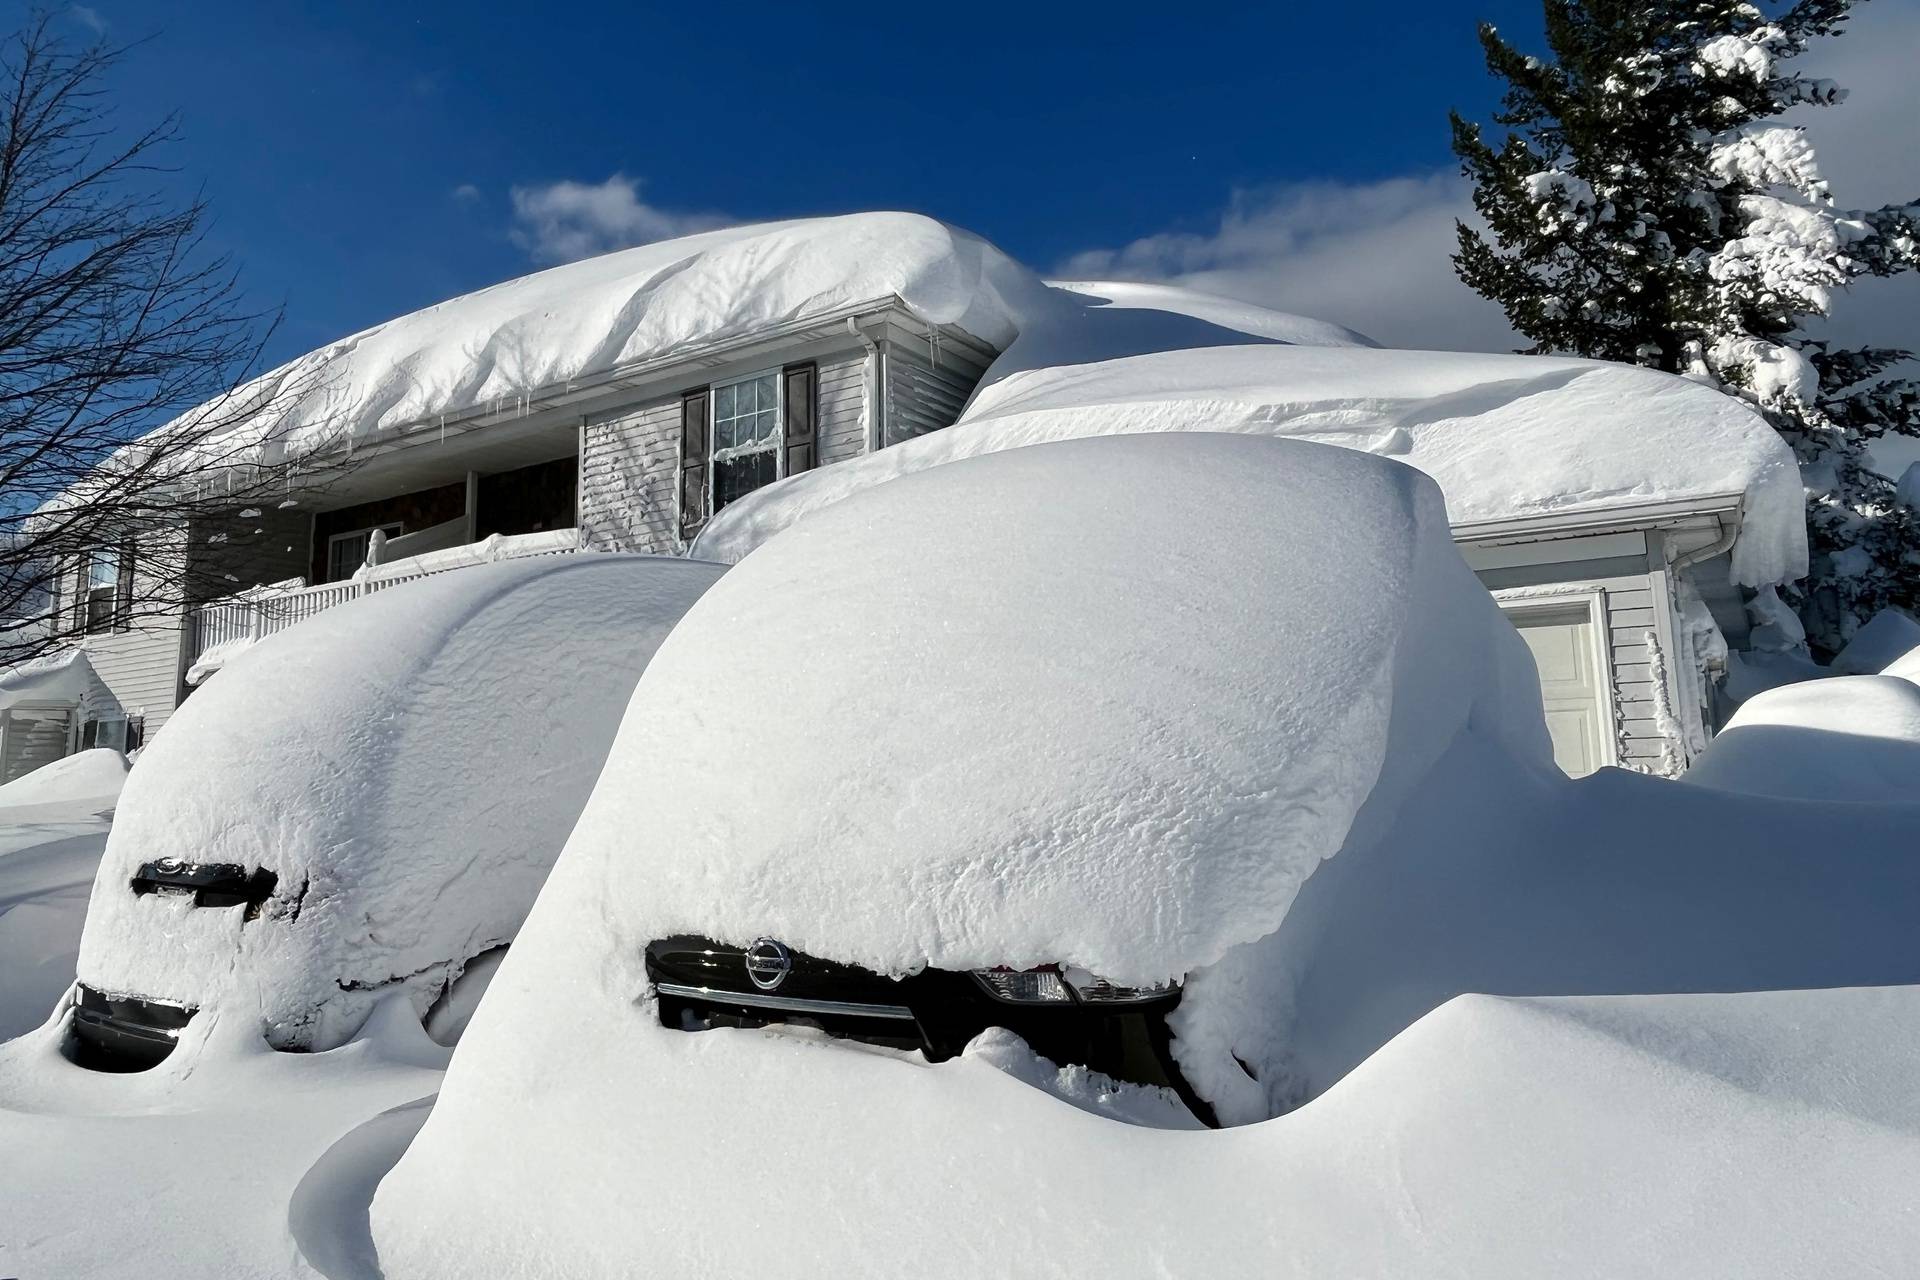 Vehicles are covered in a snowdrift during a lull in a snow storm hitting the Buffalo area